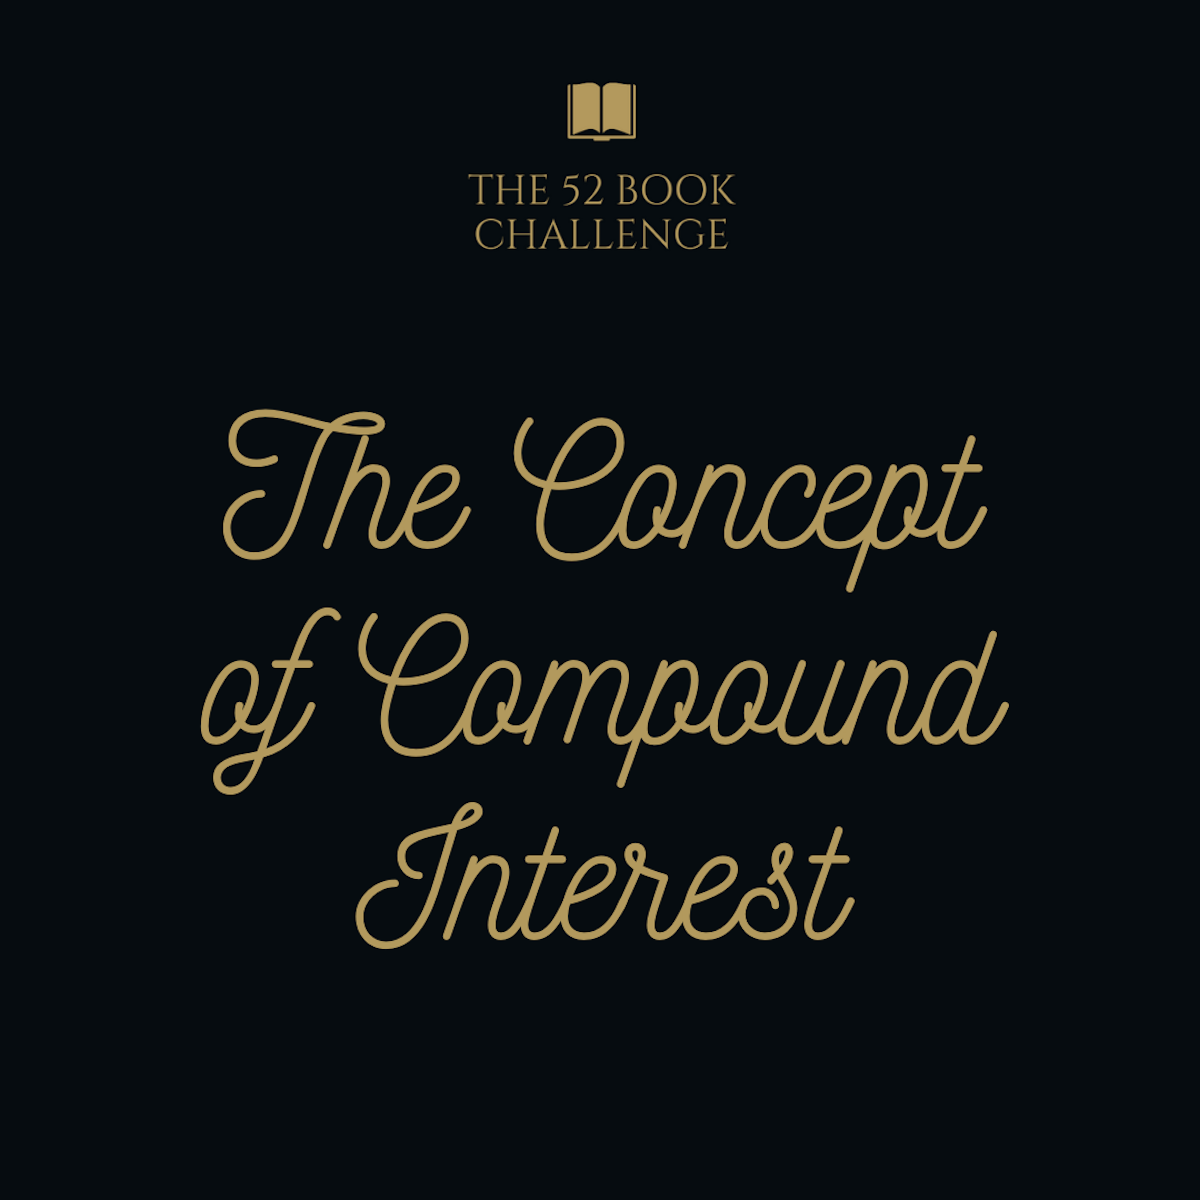 The Concept of Compound Interest